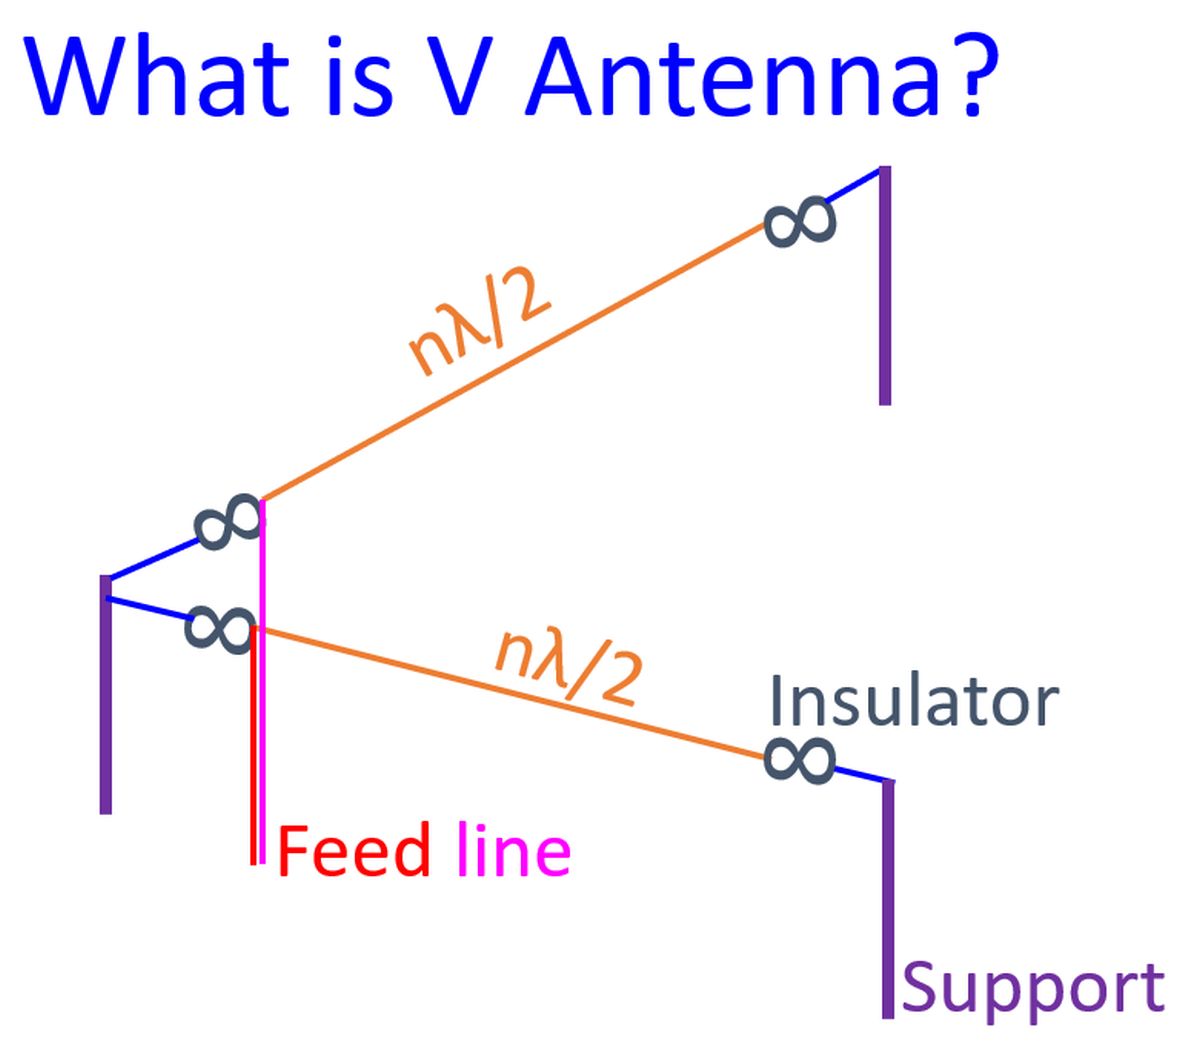 What is V Antenna?